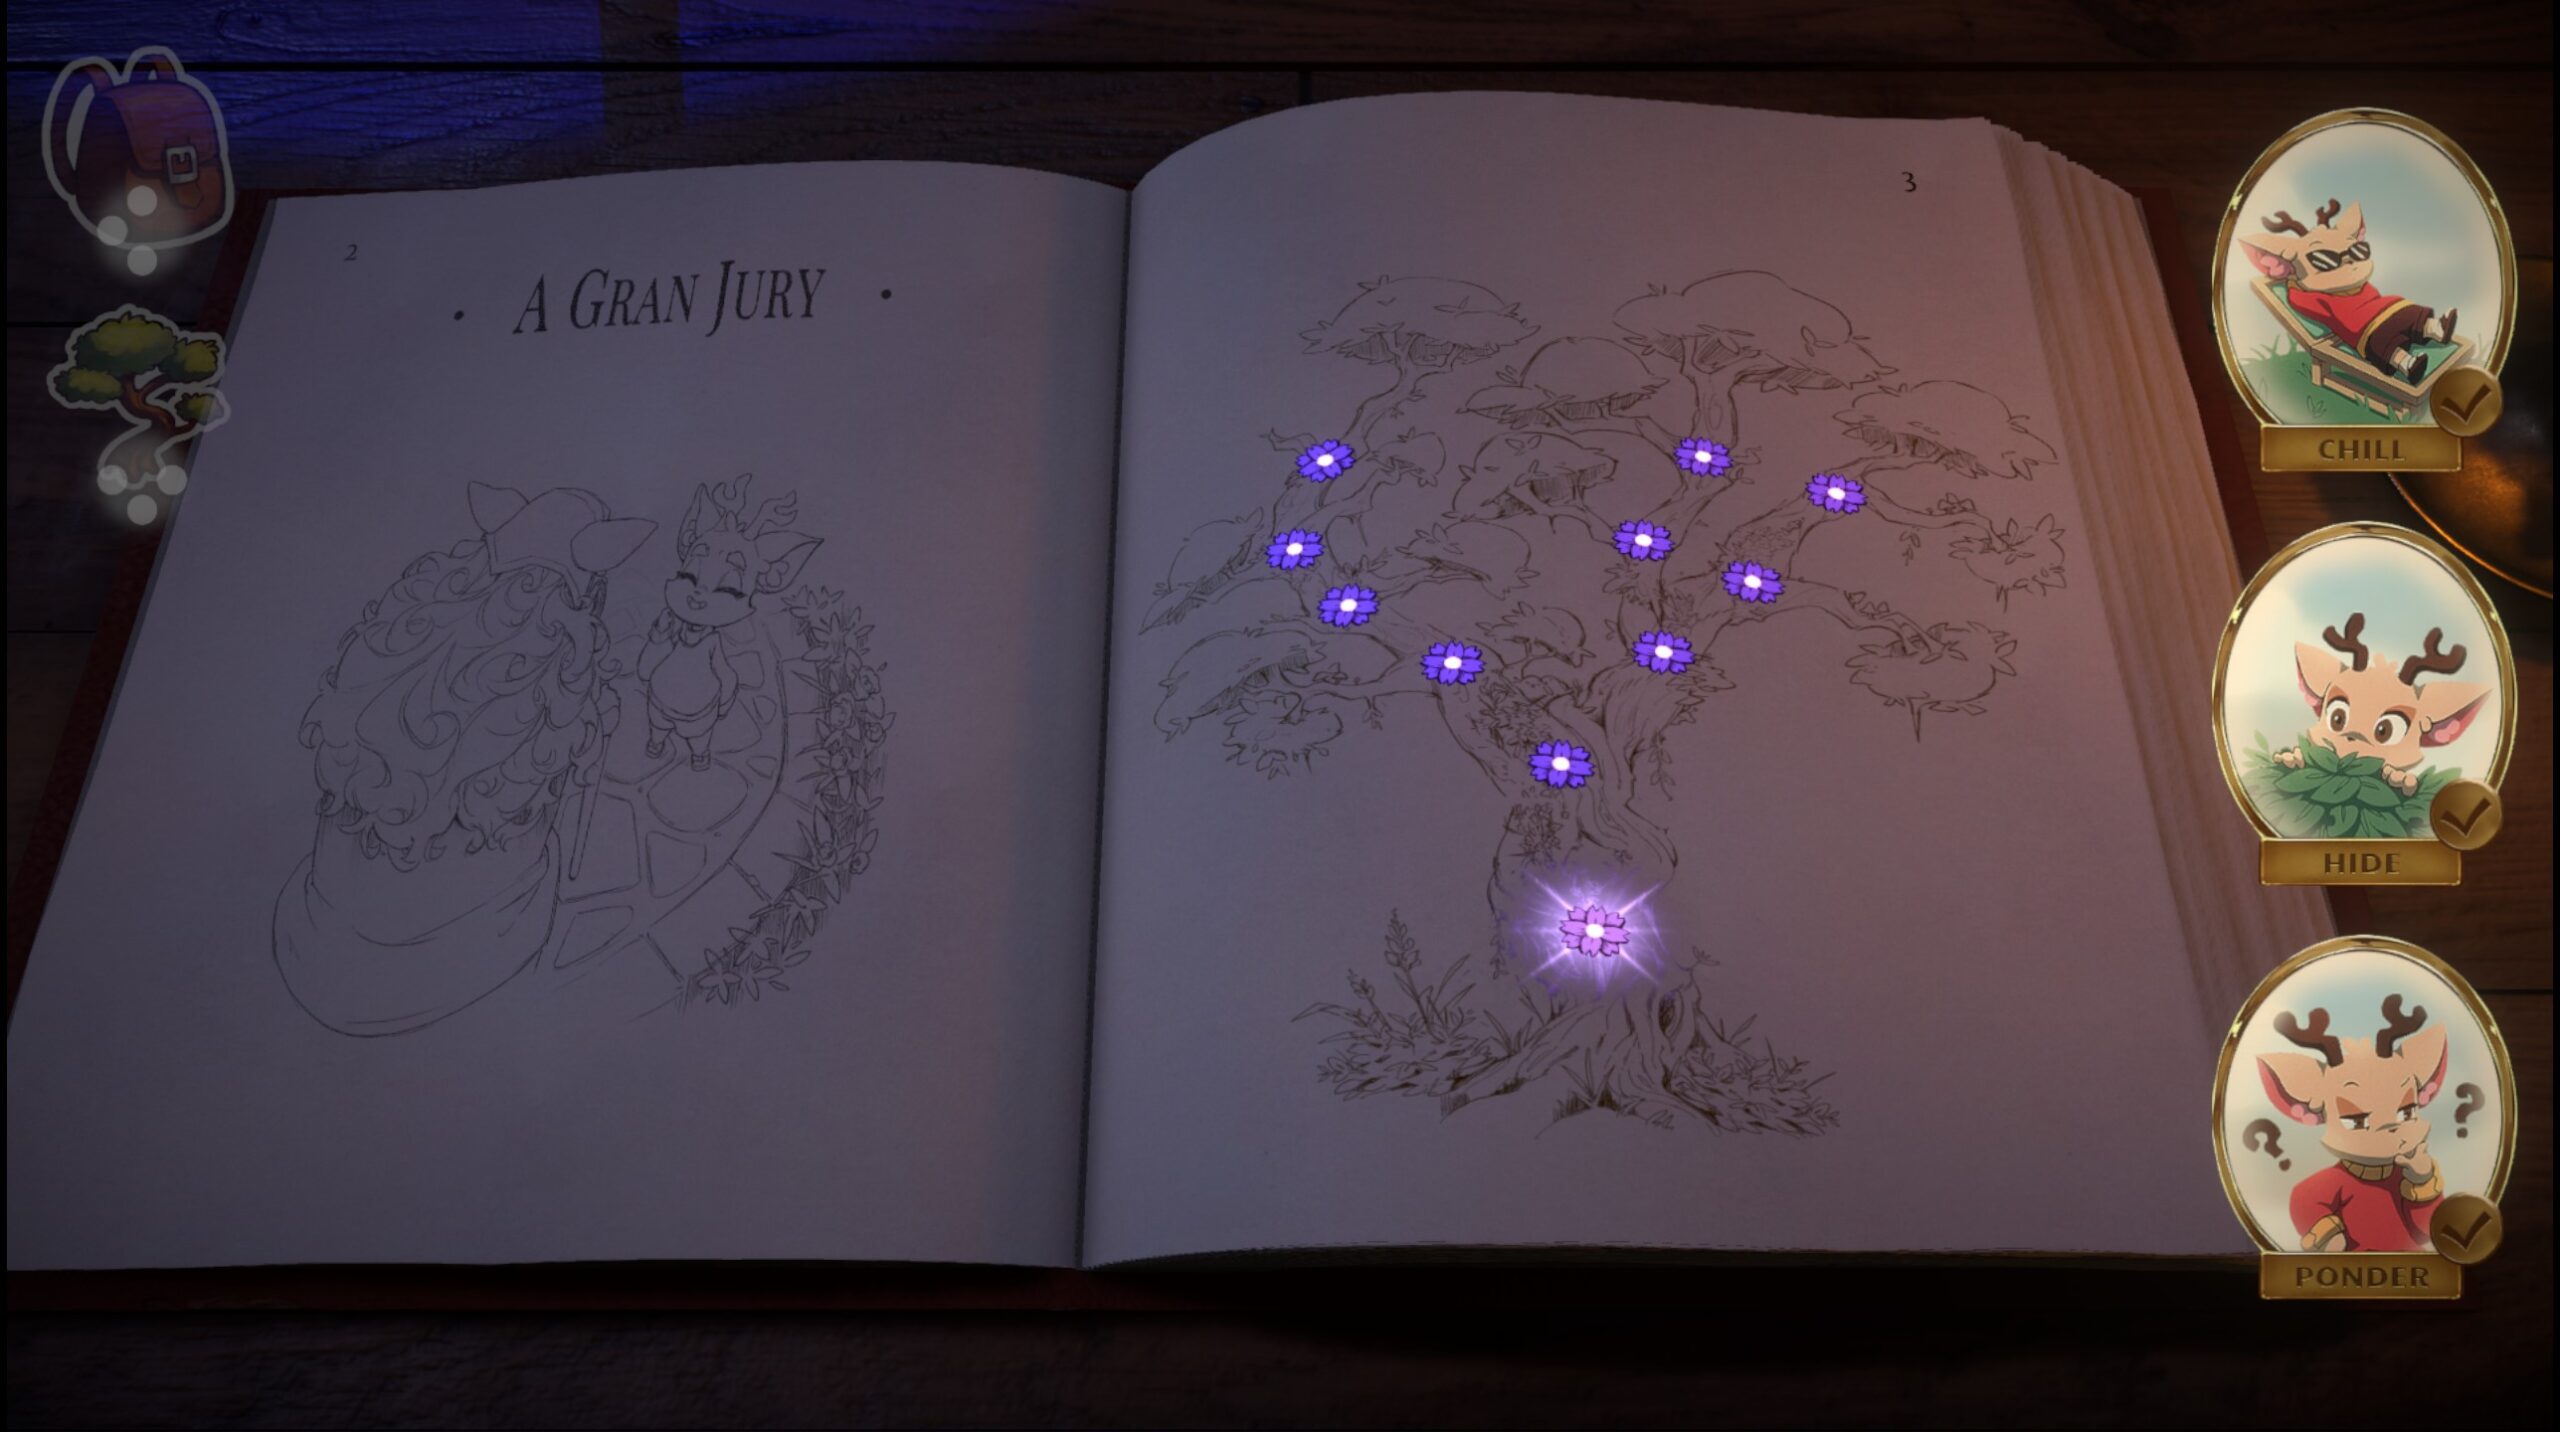 Screenshot of the story book in Beacon Pines with different nubs on the branches glowing purple